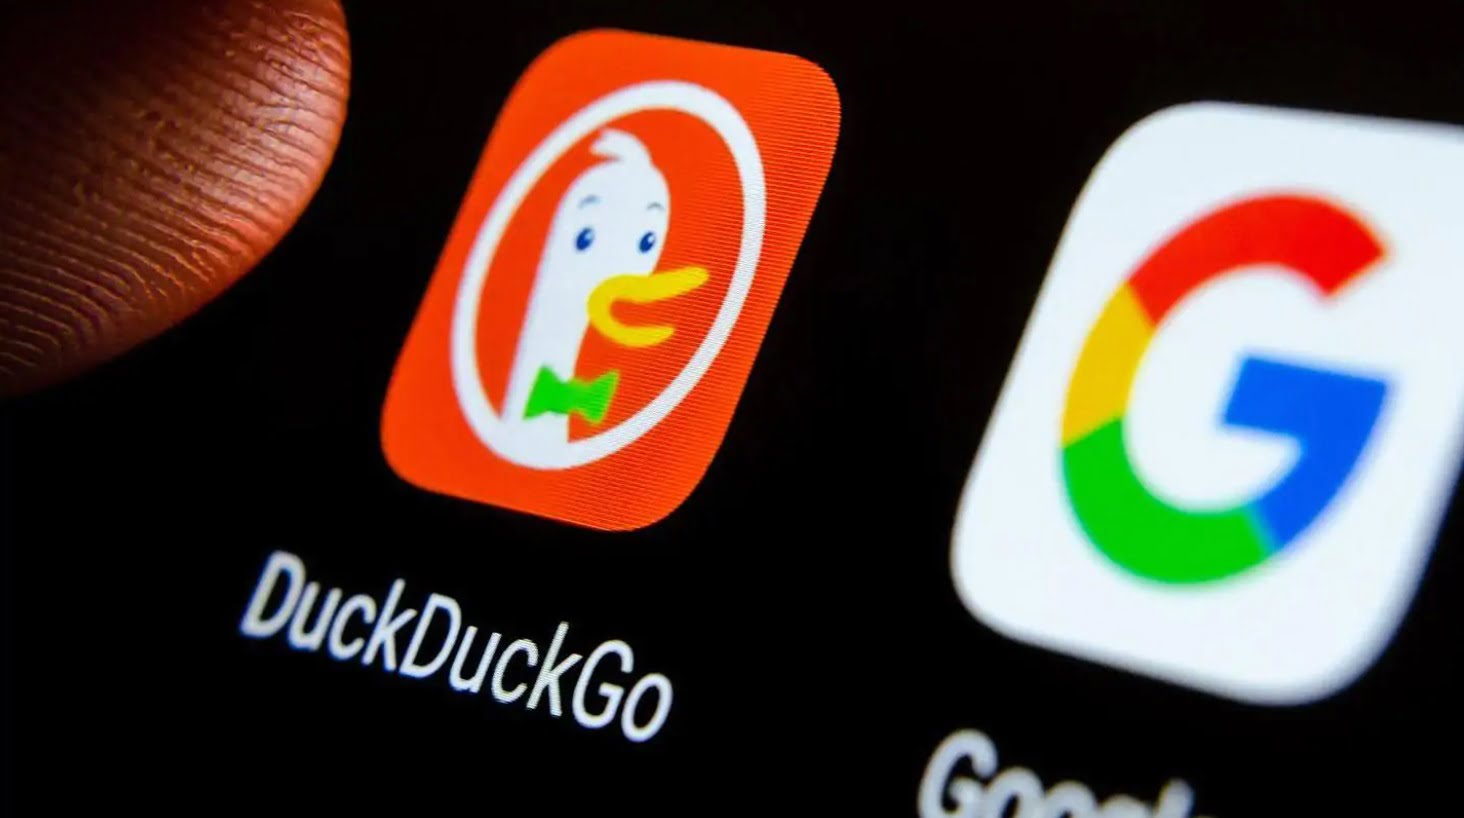 How to set DuckDuckGo as the default search engine?